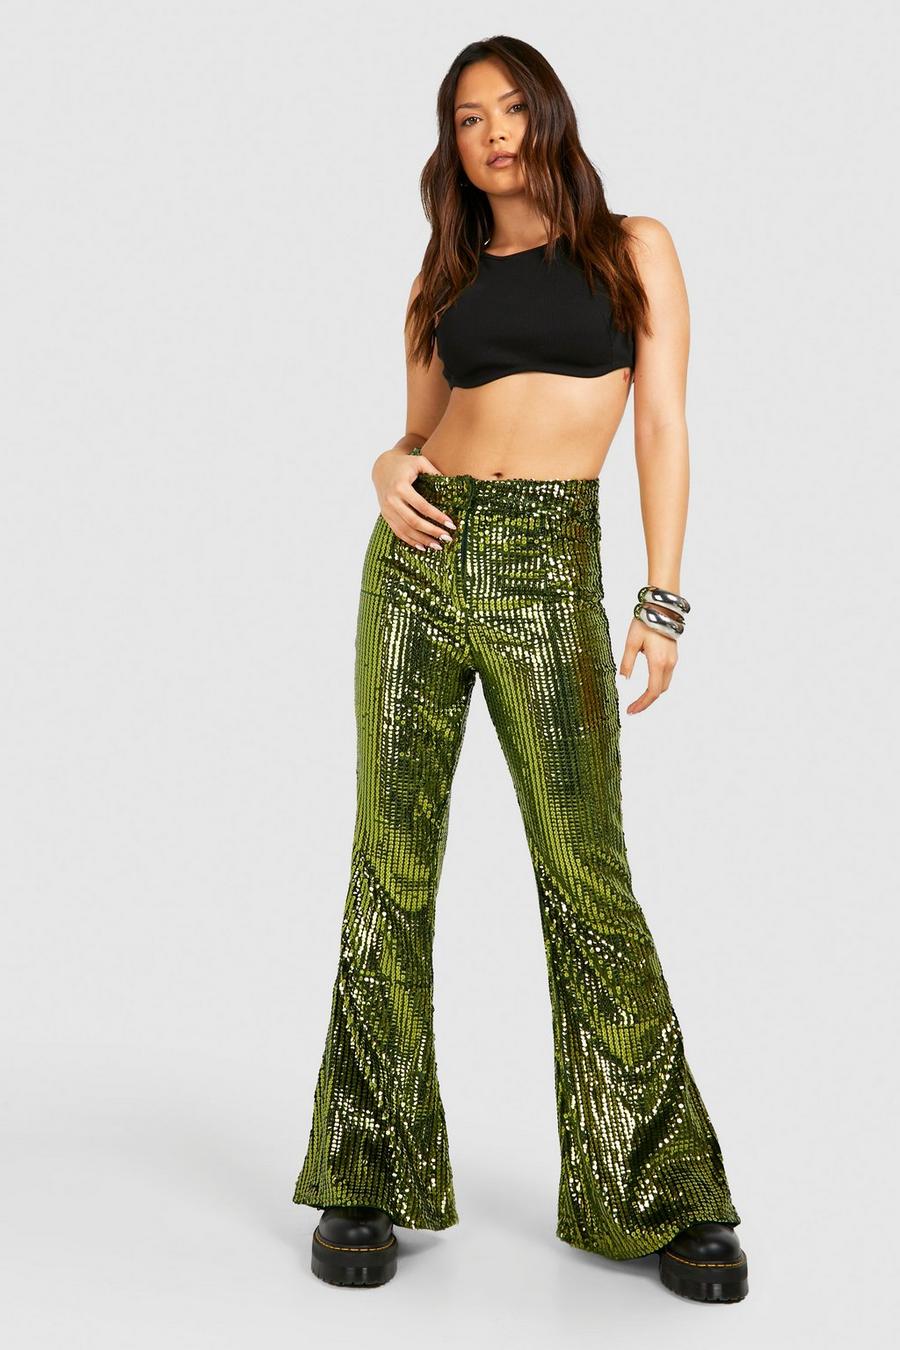 Chartreuse yellow High Waist Sequin Flare Pants